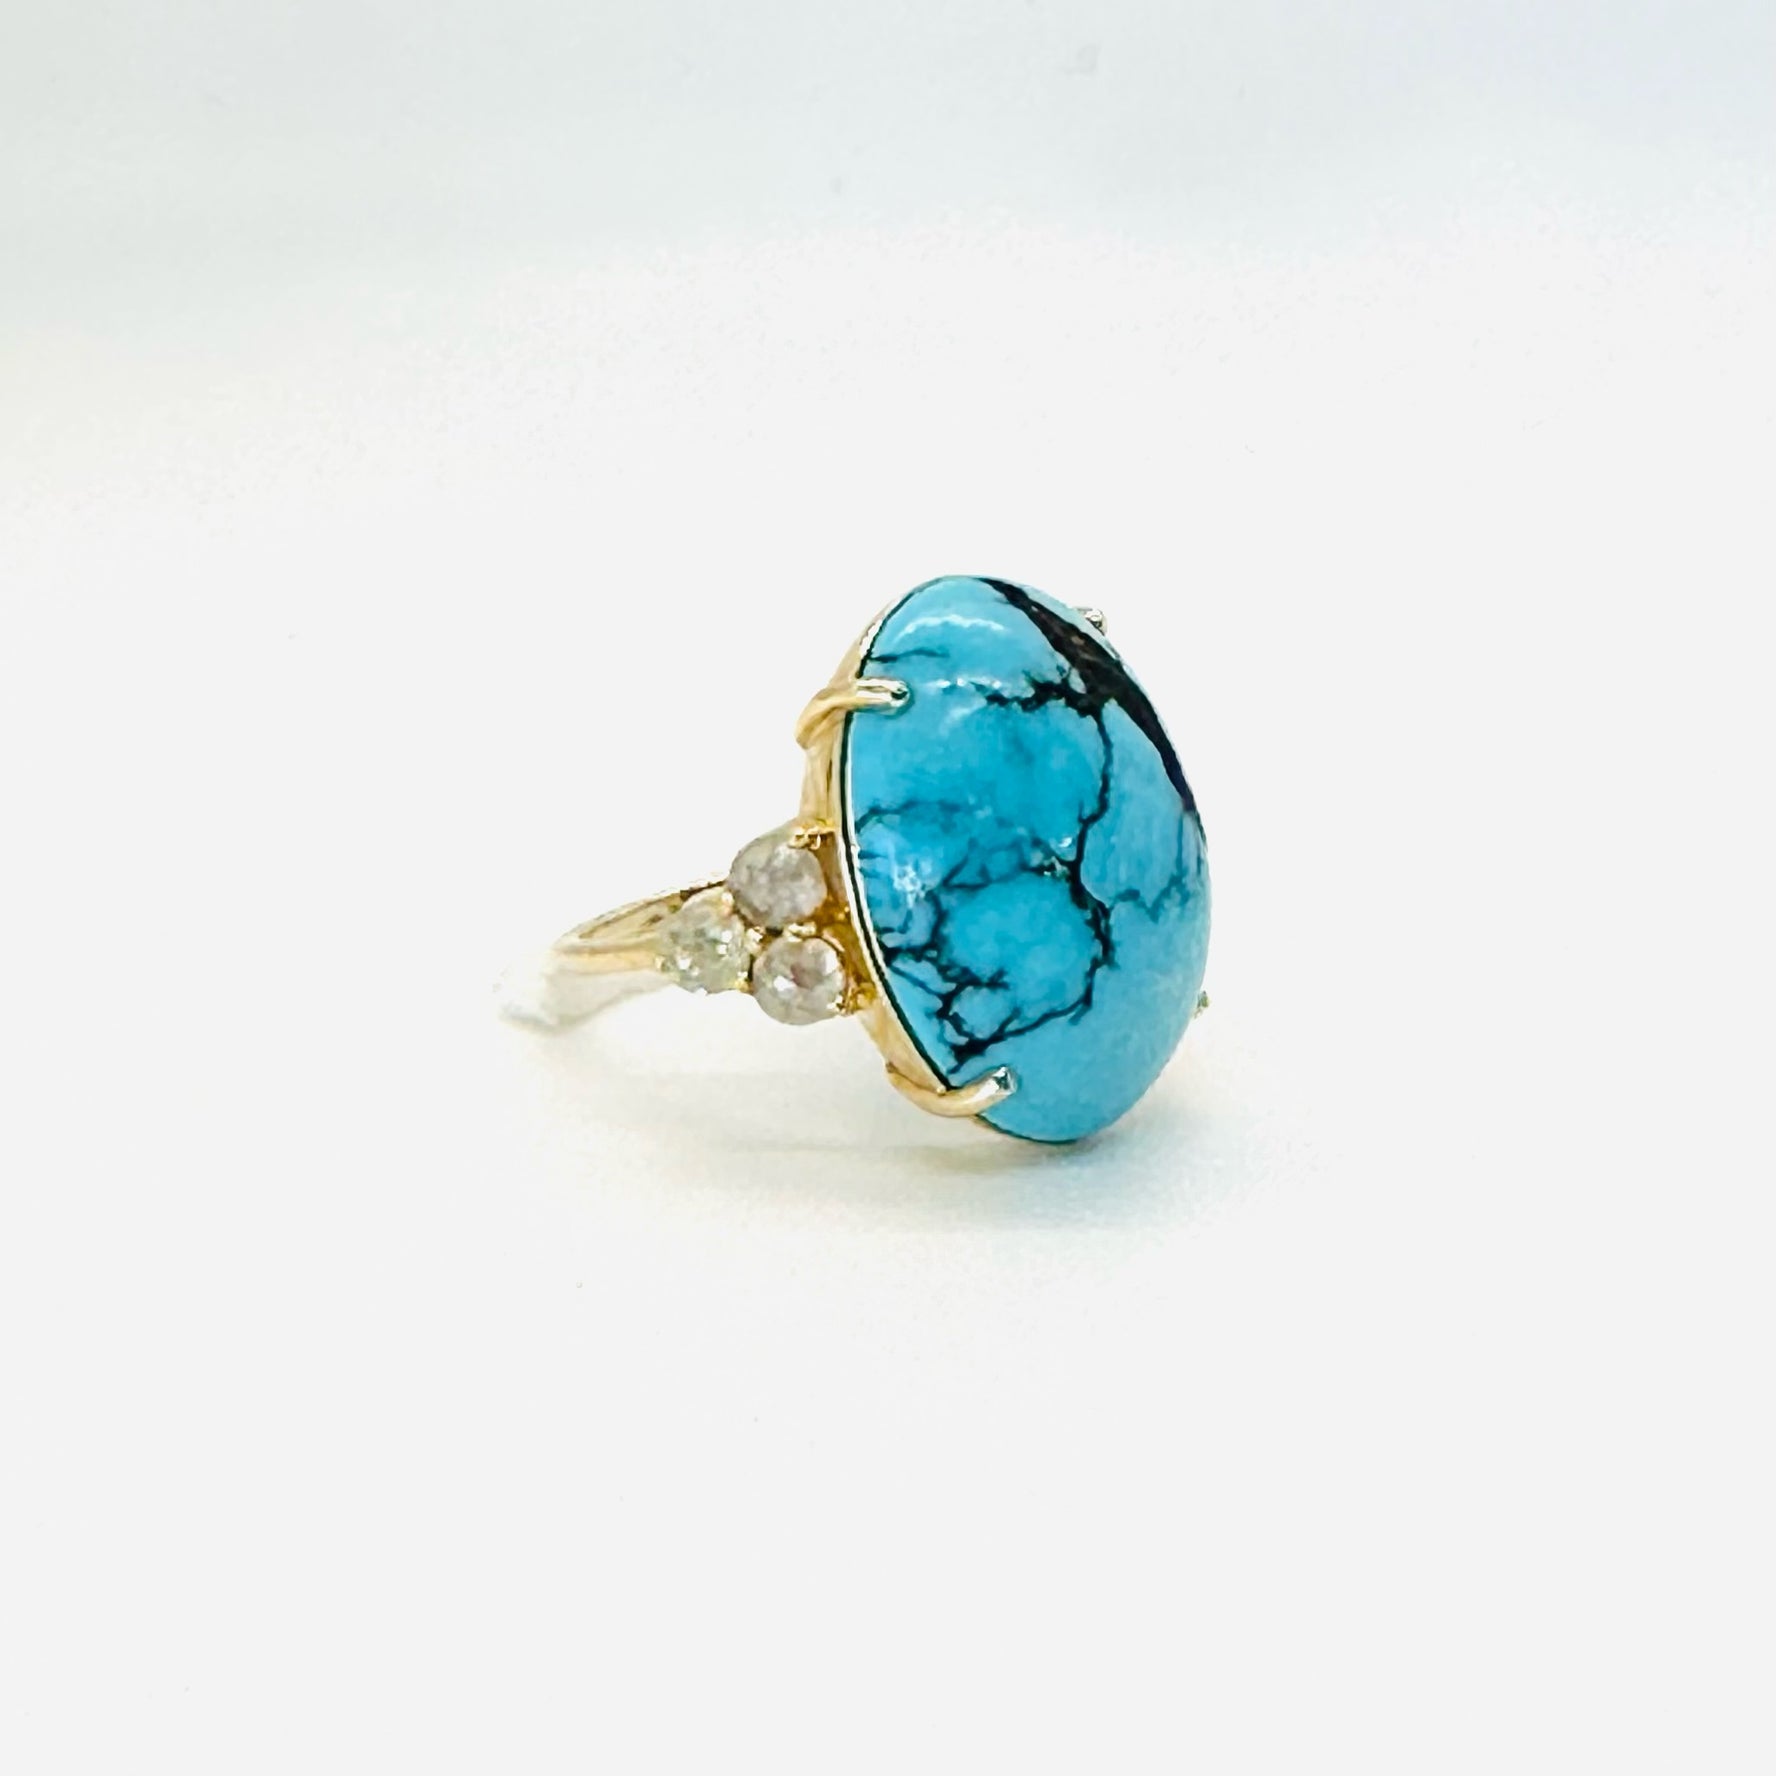 14k gold and turquoise statement ring